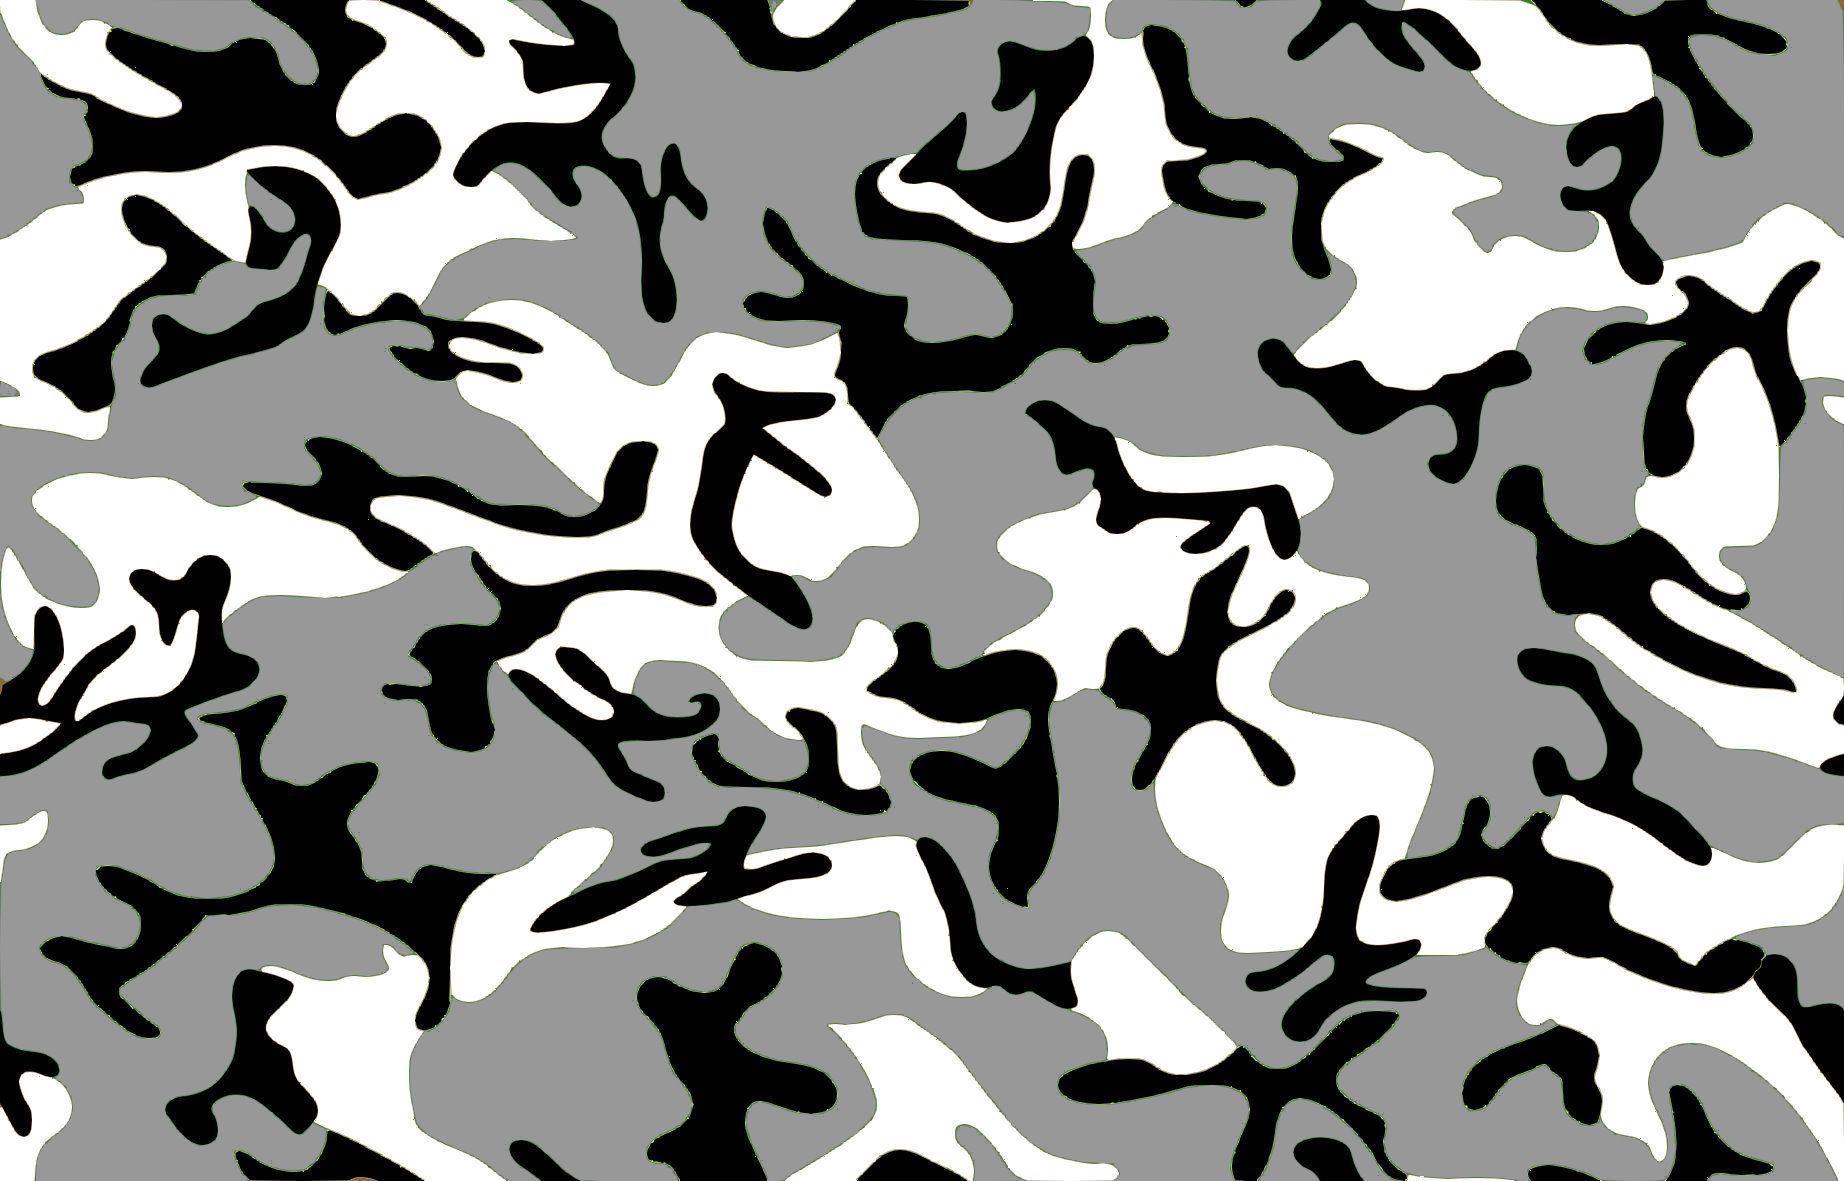 Black and White Camo Wallpaper. Ridley Raw streetwear collection